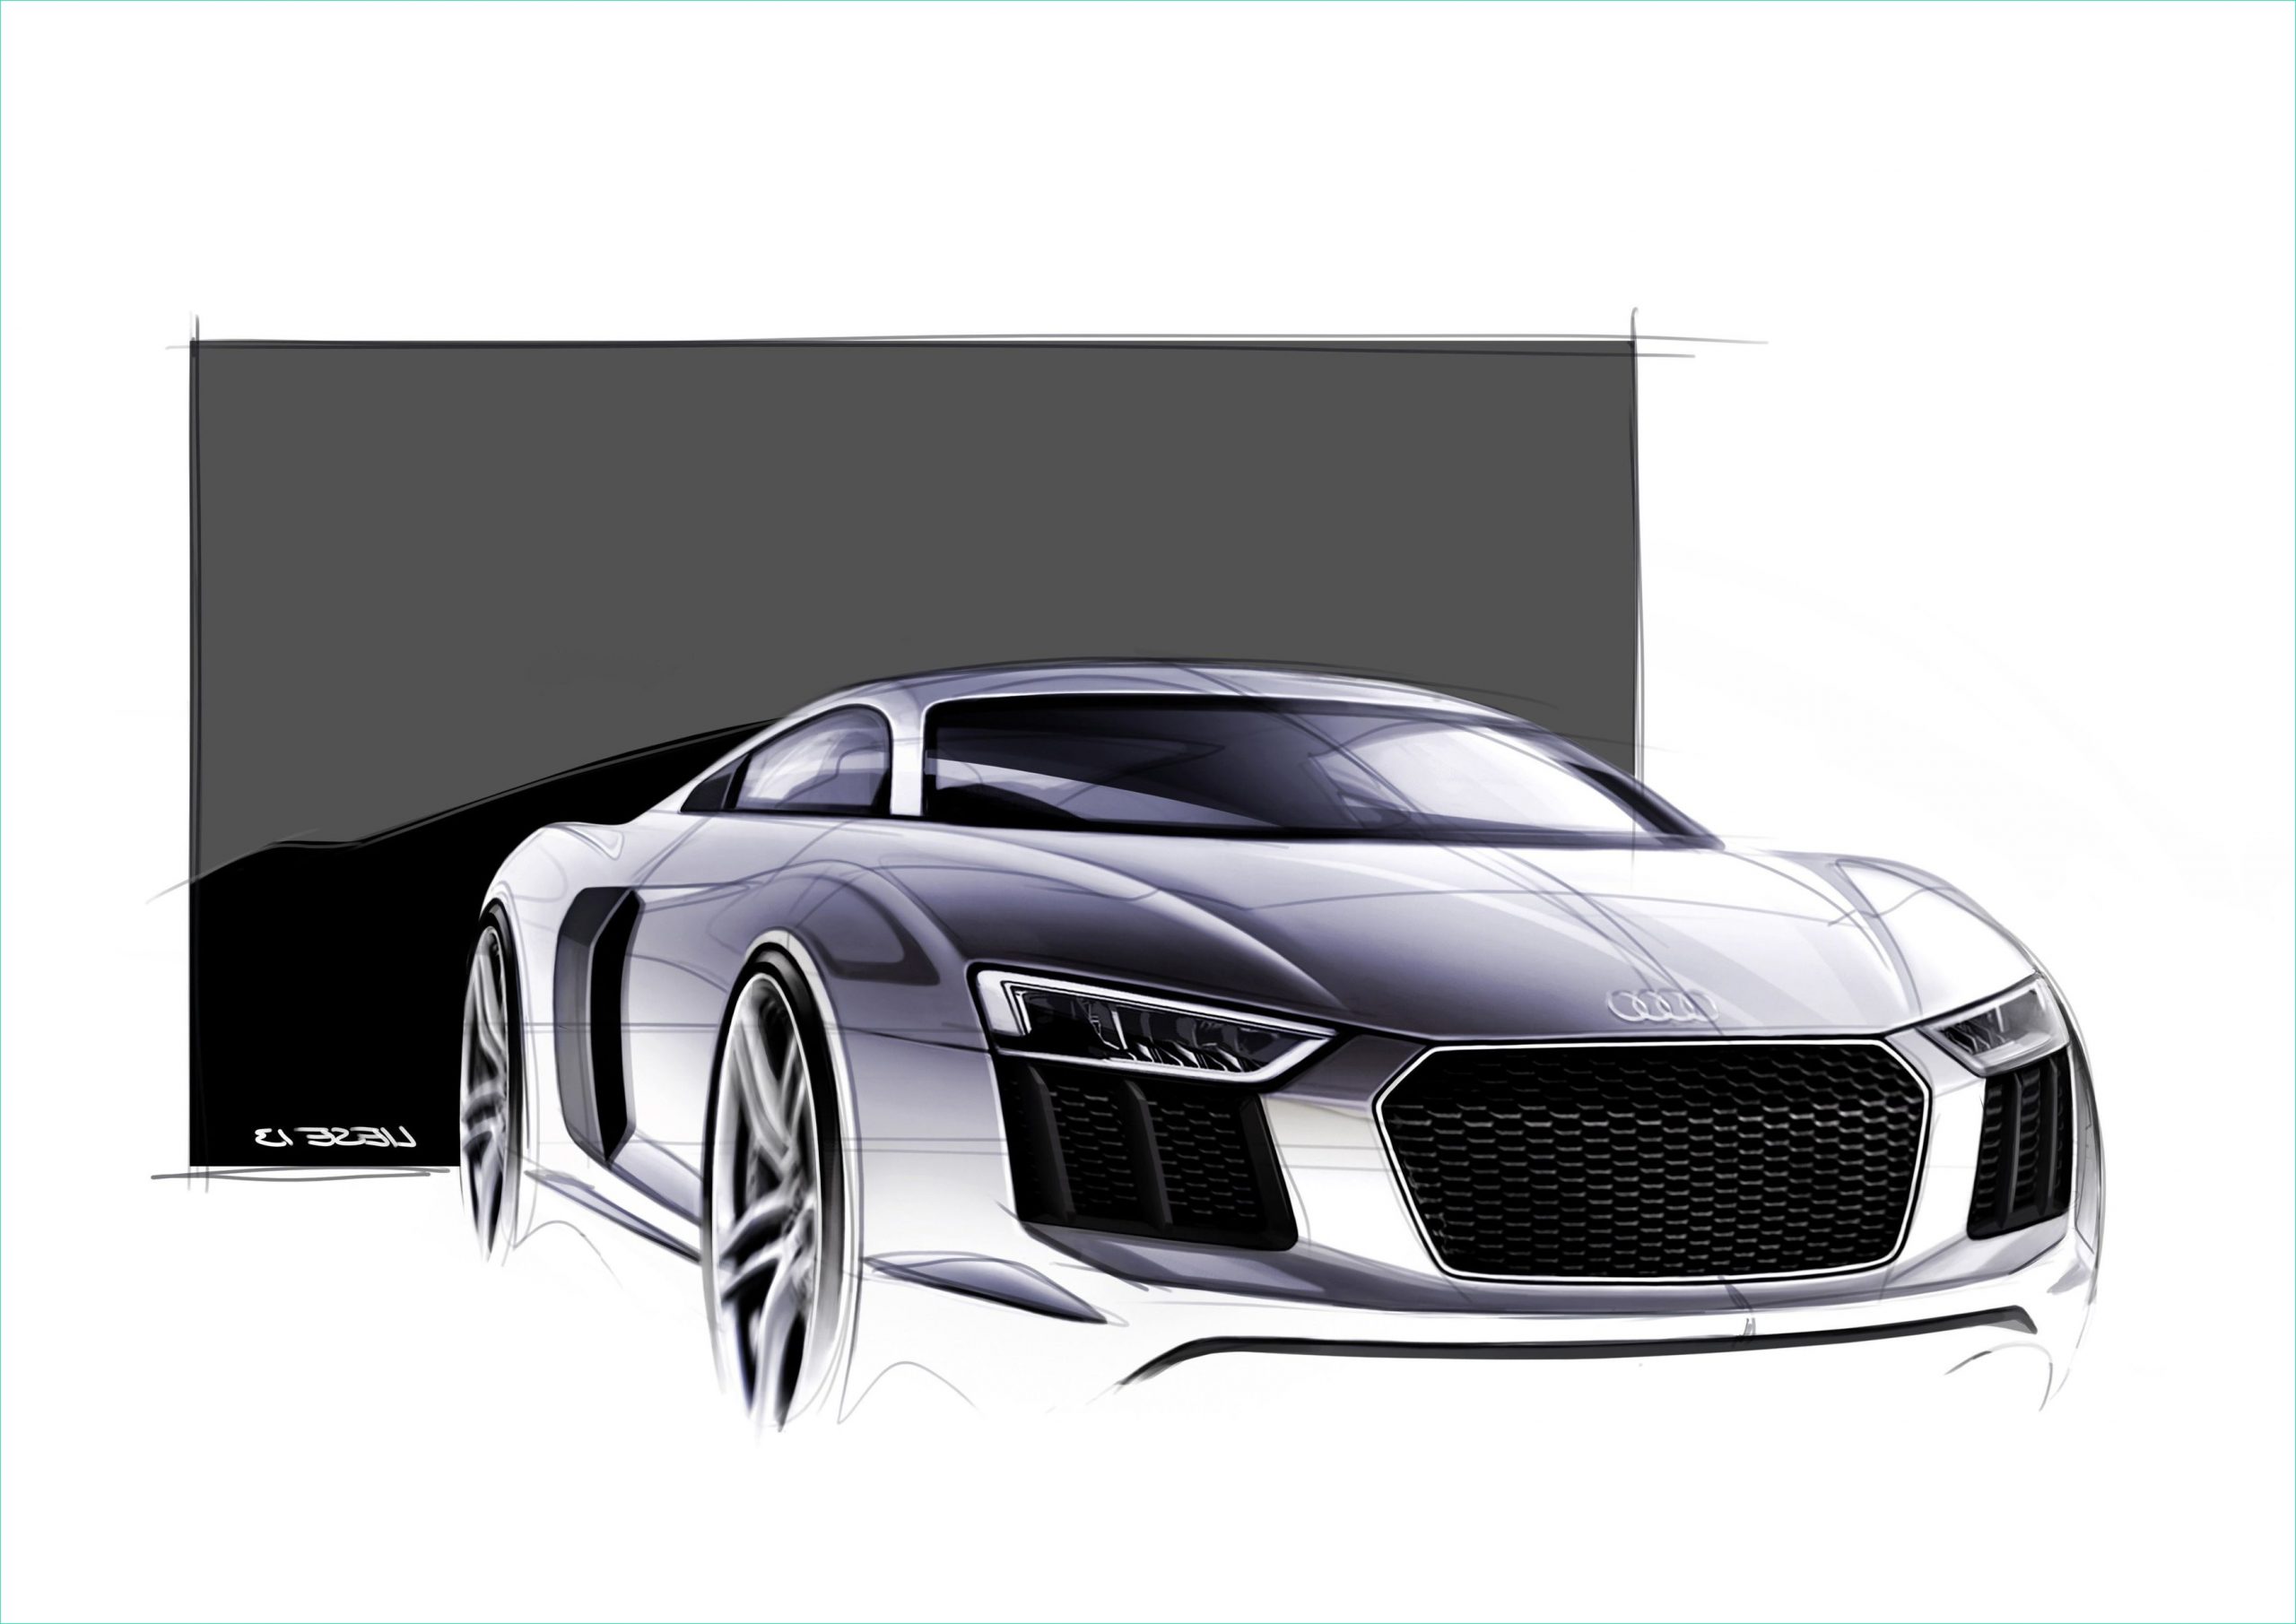 Audi R8 Dessin Nouveau Photographie 2016 Audi R8 Design Sketches are something to Geek Over